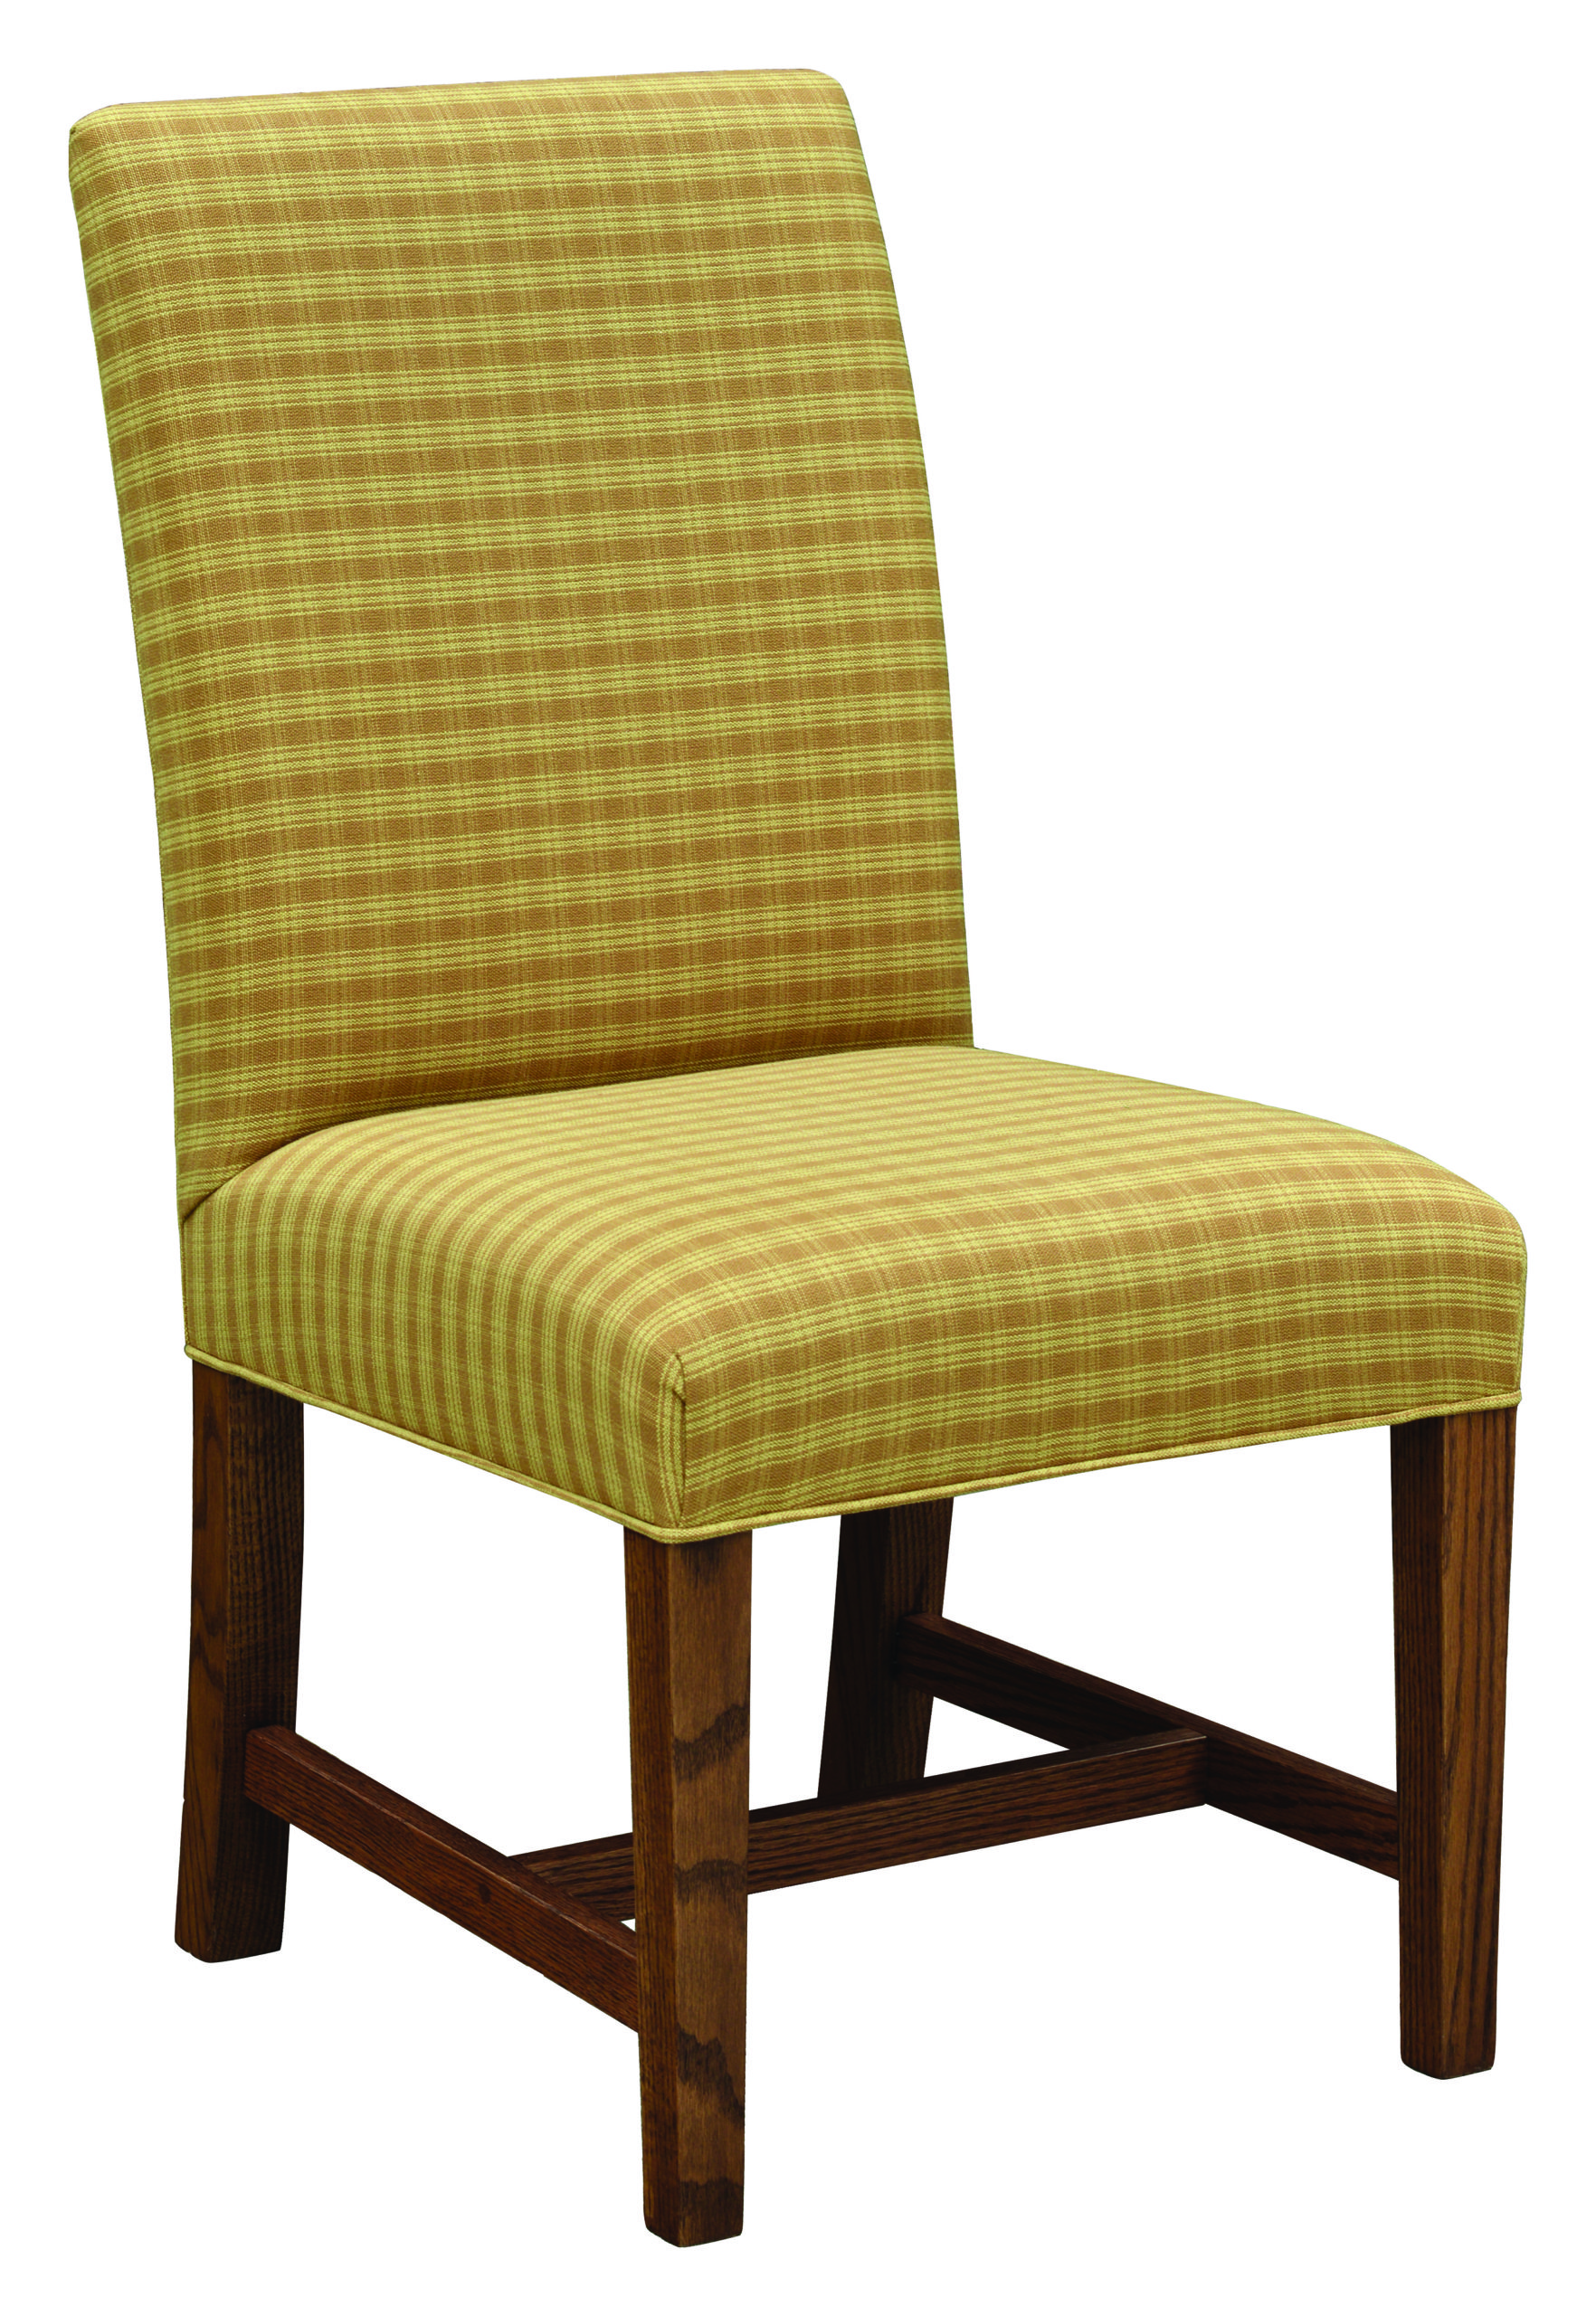 https://americanheritageshop.com/wp-content/uploads/JLLS-Lincoln-Low-Back-Straight-Top-Chair-scaled.jpg